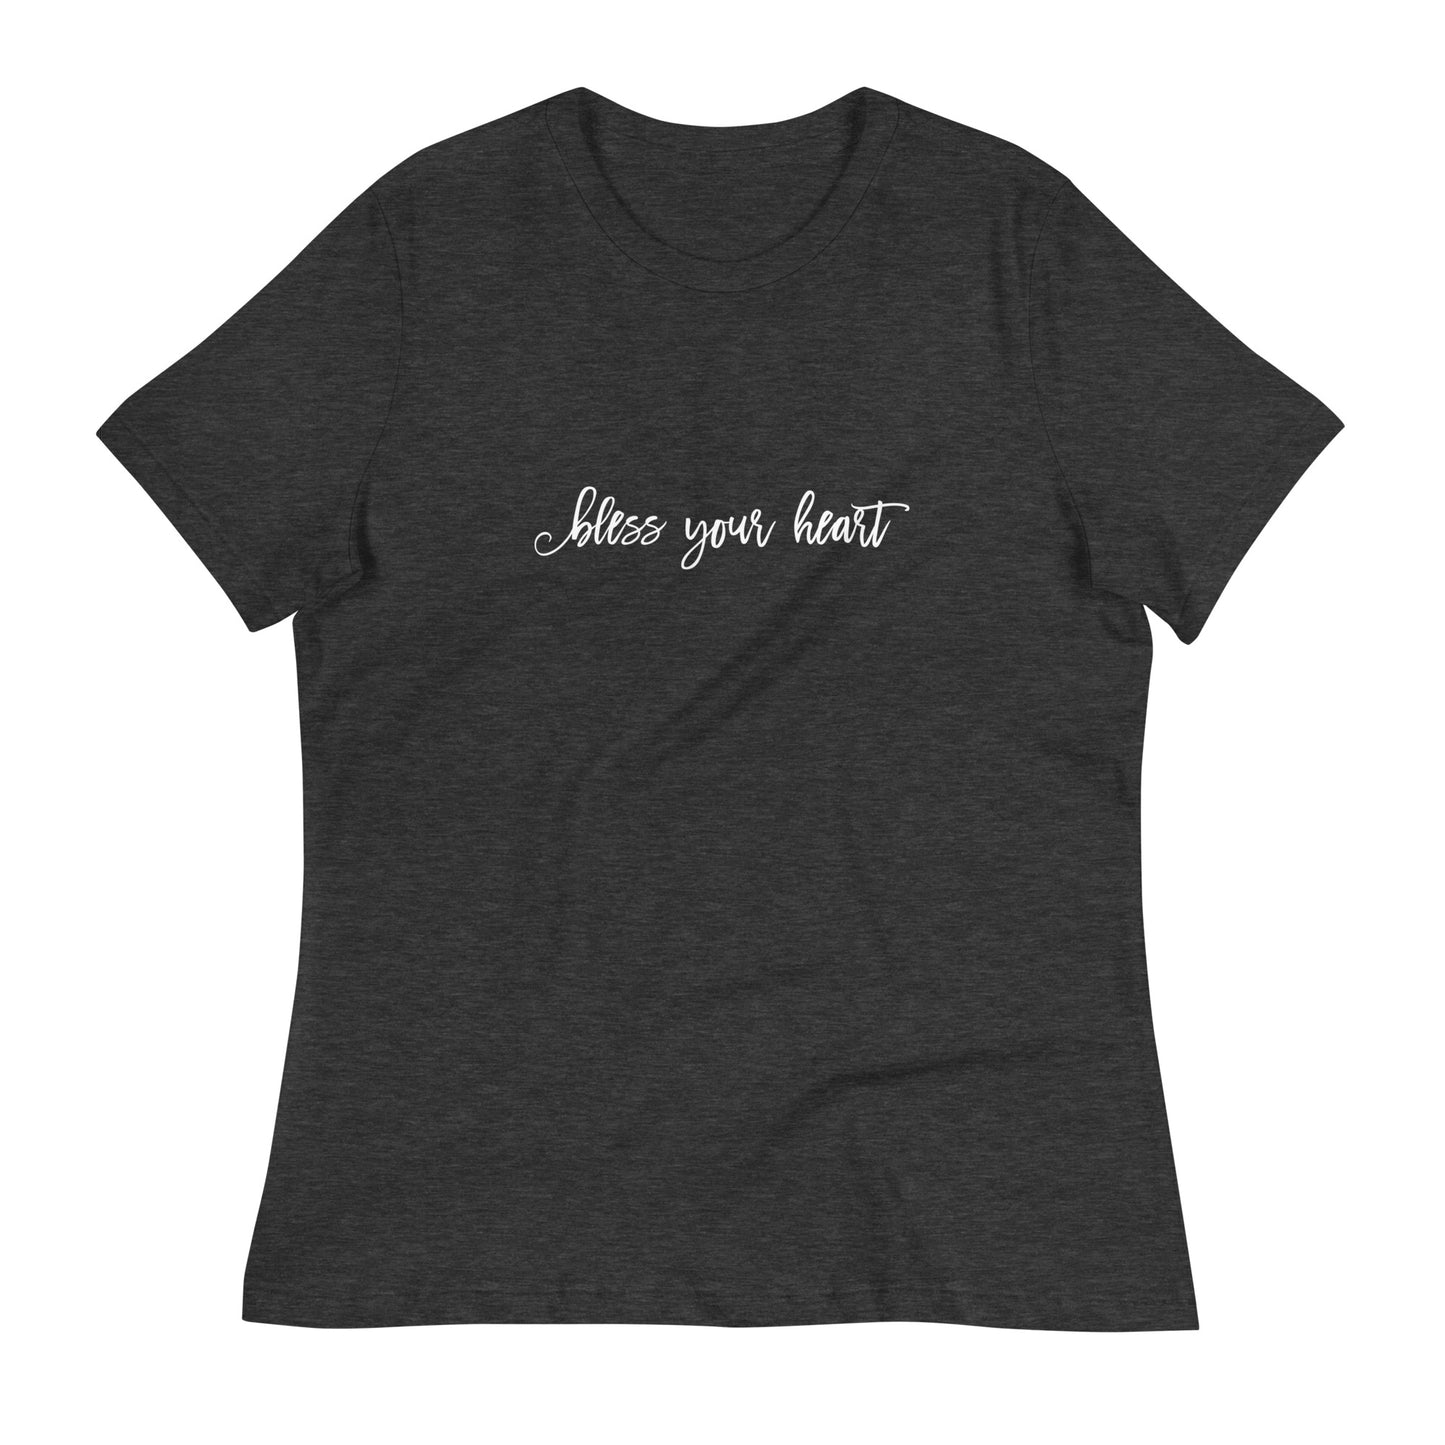 Dark Grey Heather women's relaxed fit t-shirt with white graphic in an excessively twee font: "bless your heart"